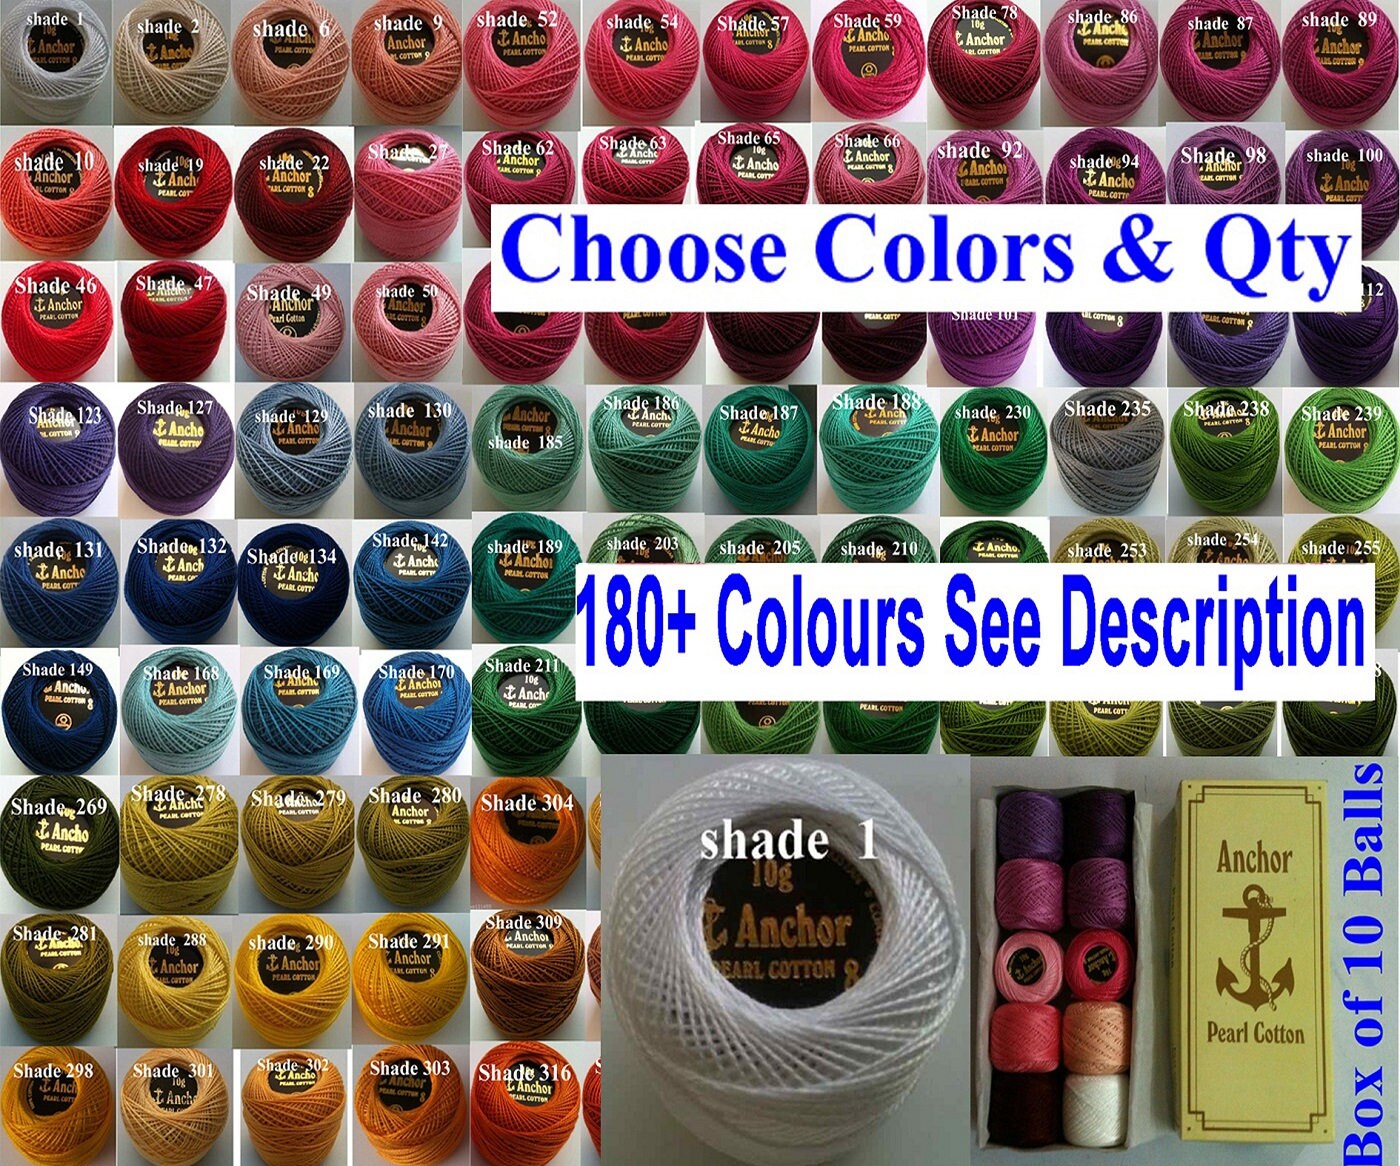 New 5 Anchor Pearl Cotton Crochet Embroidery Thread Balls with all Great Colours 